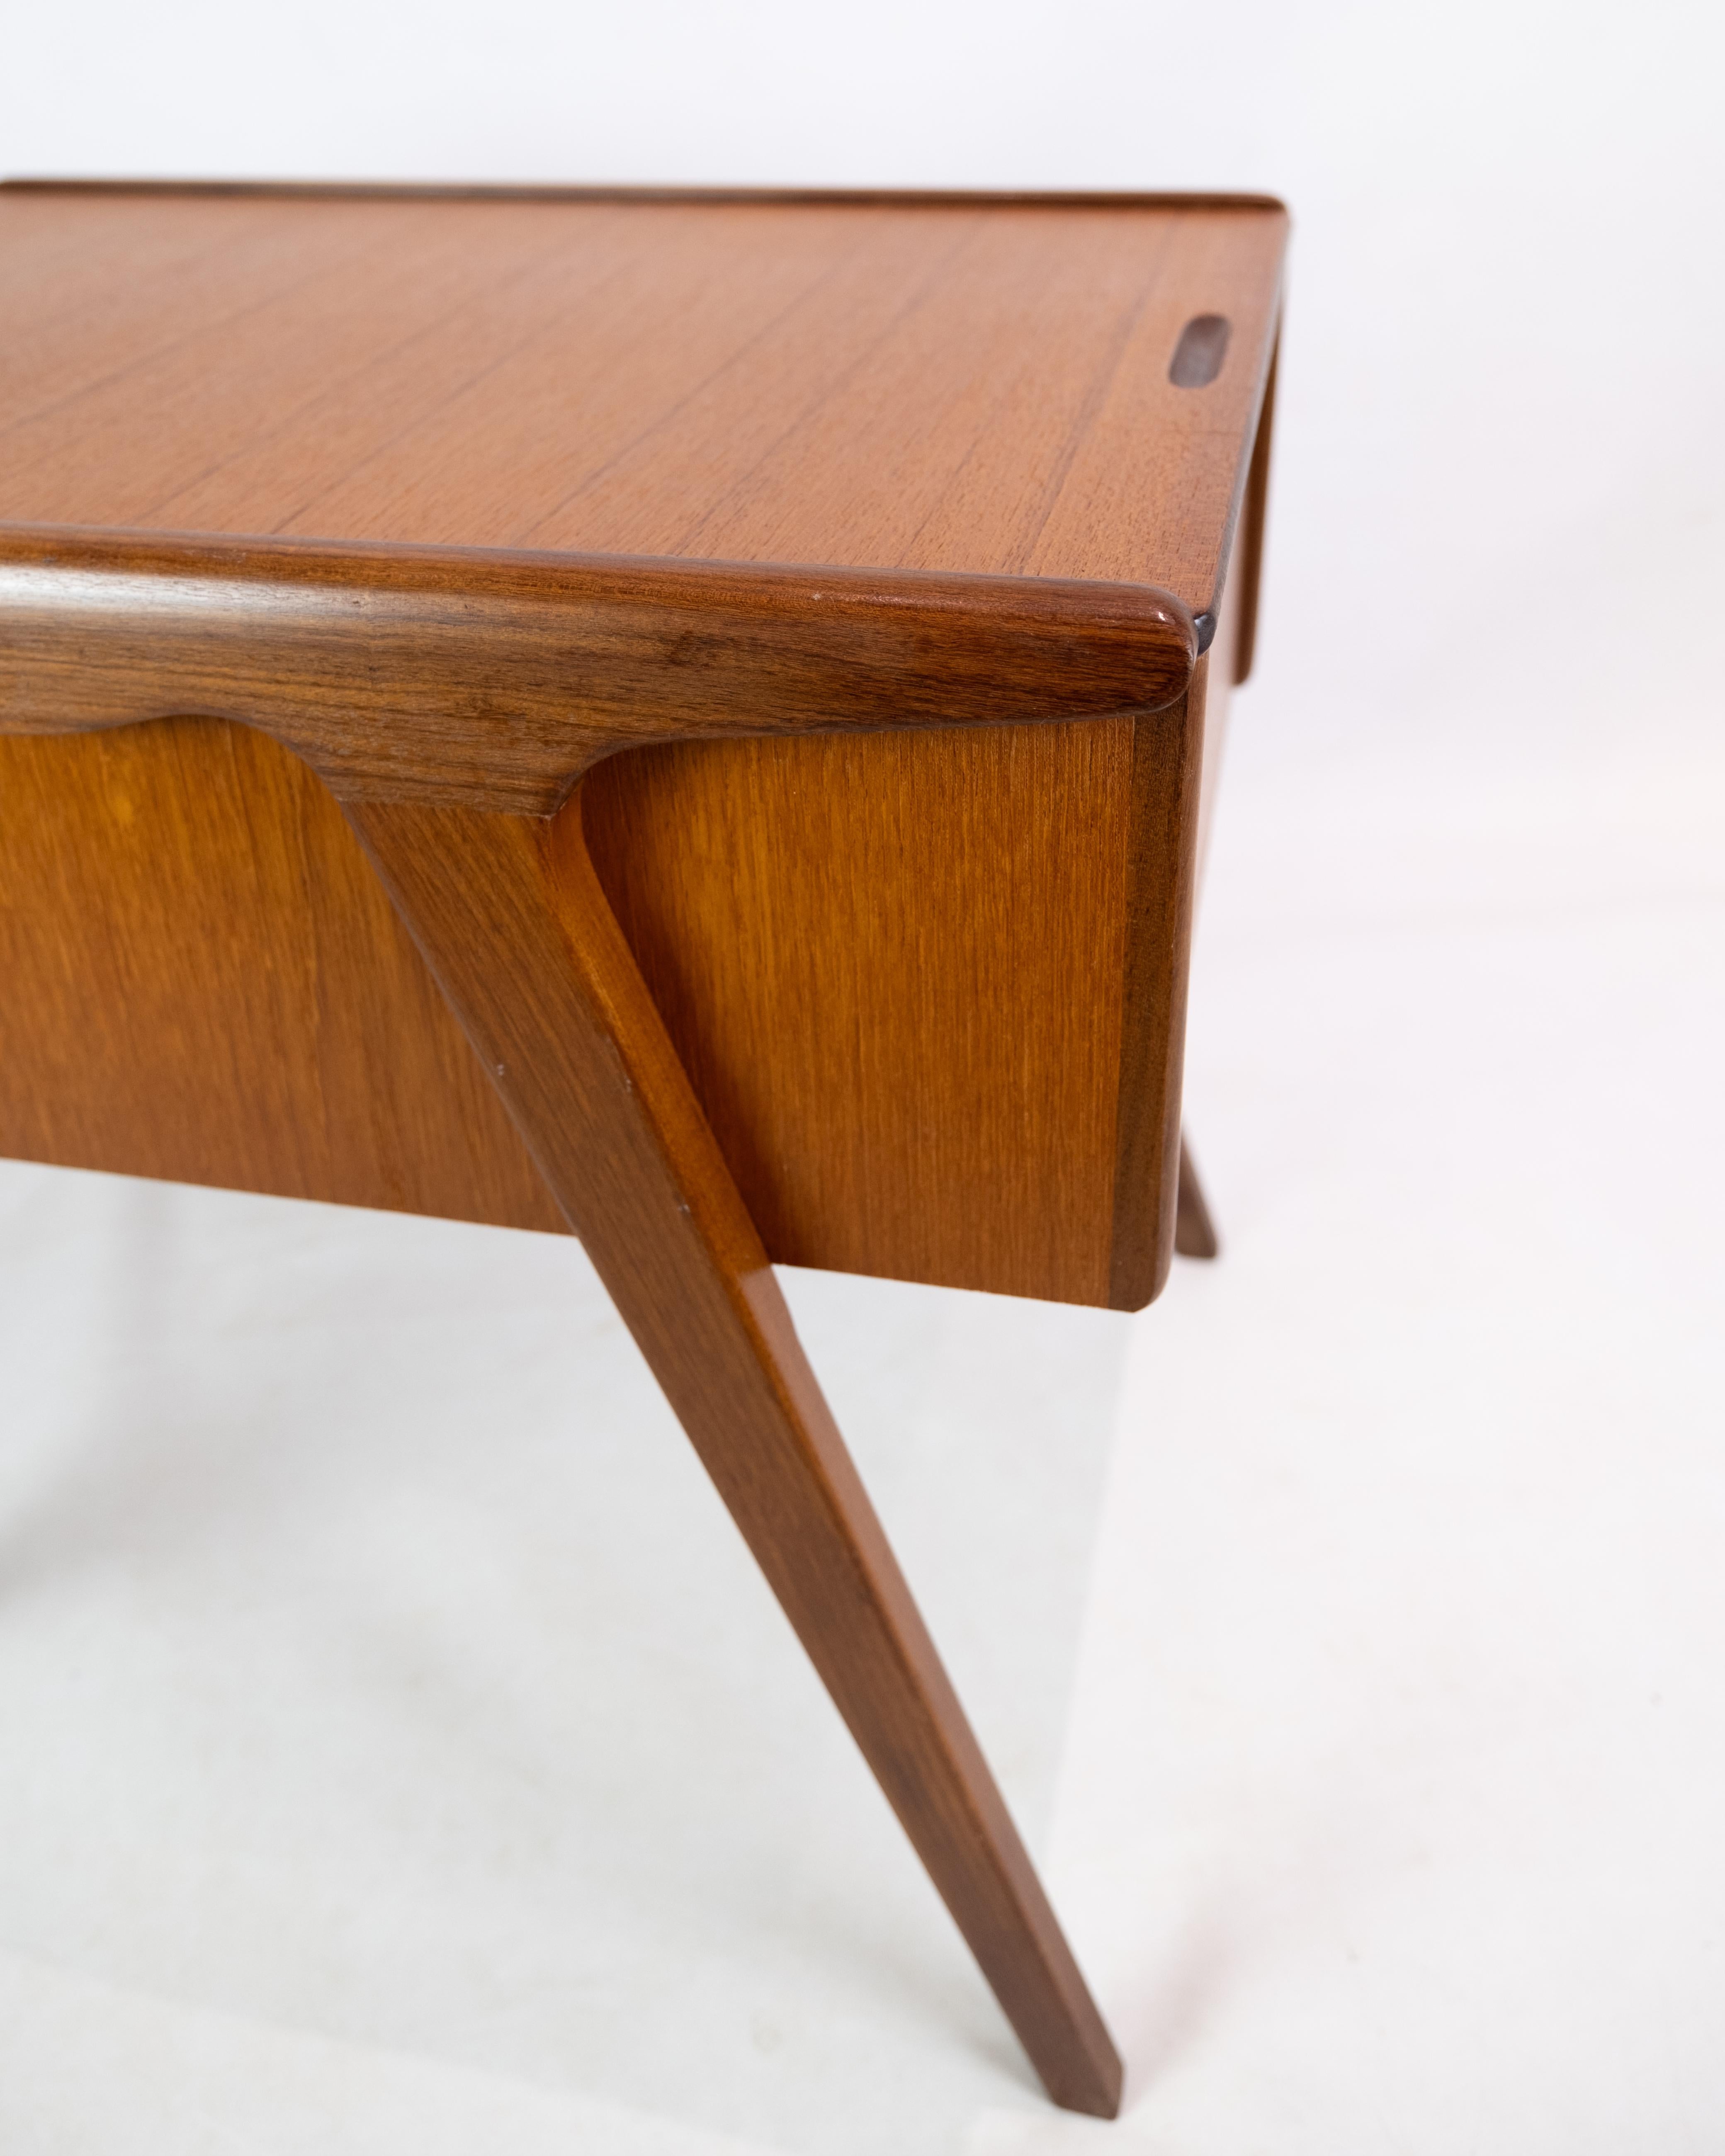 Mid-Century Modern Sewing Table in Teak Wood of Danish Design From The 1960's For Sale